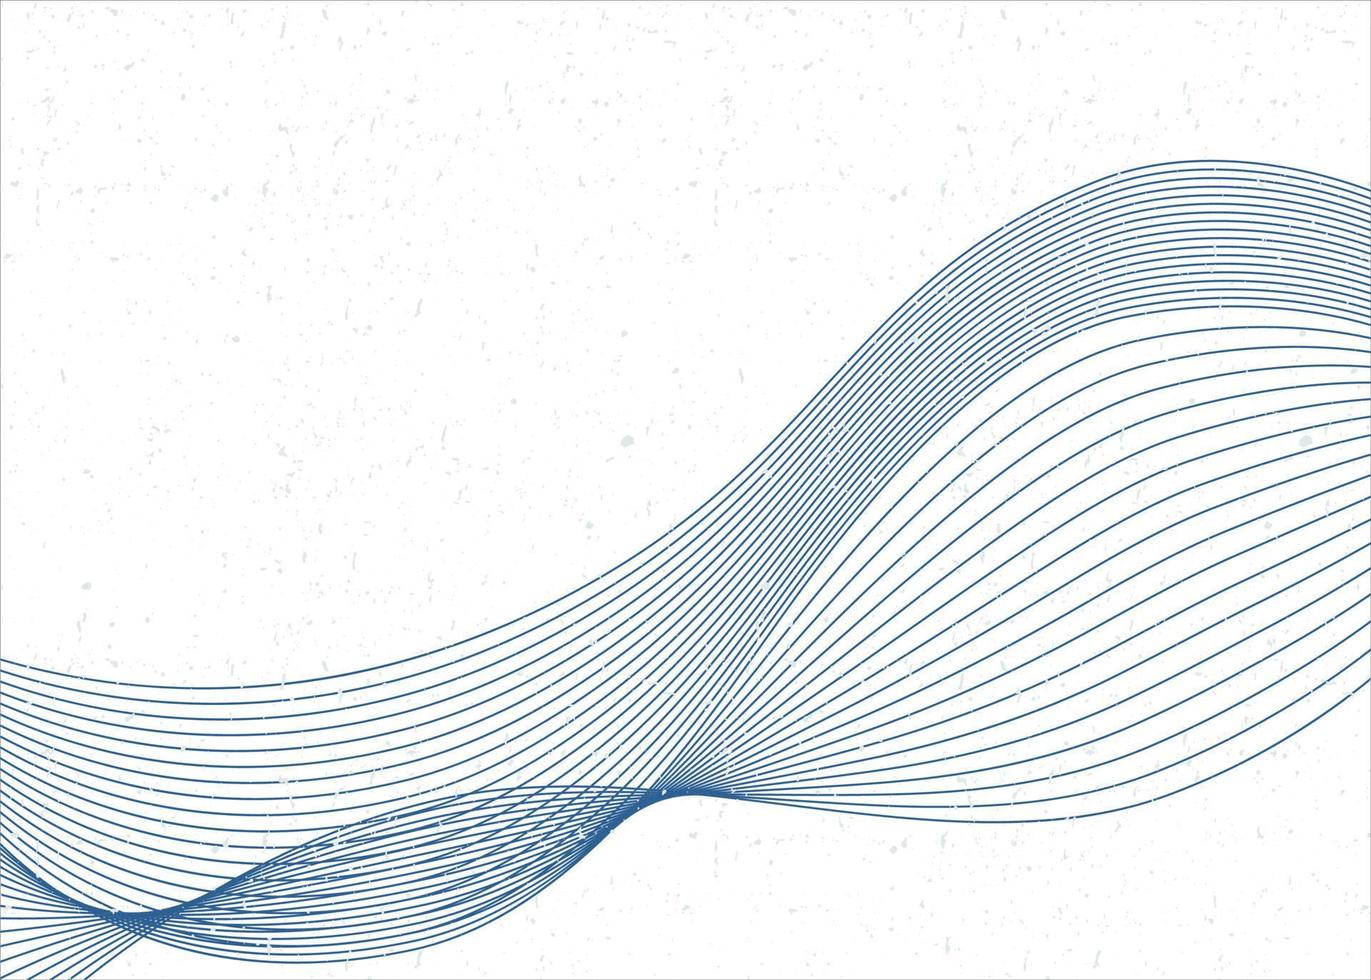 Abstract blue wave from lines with texture. Dynamic sound wave. Optical art design element. Vector background.